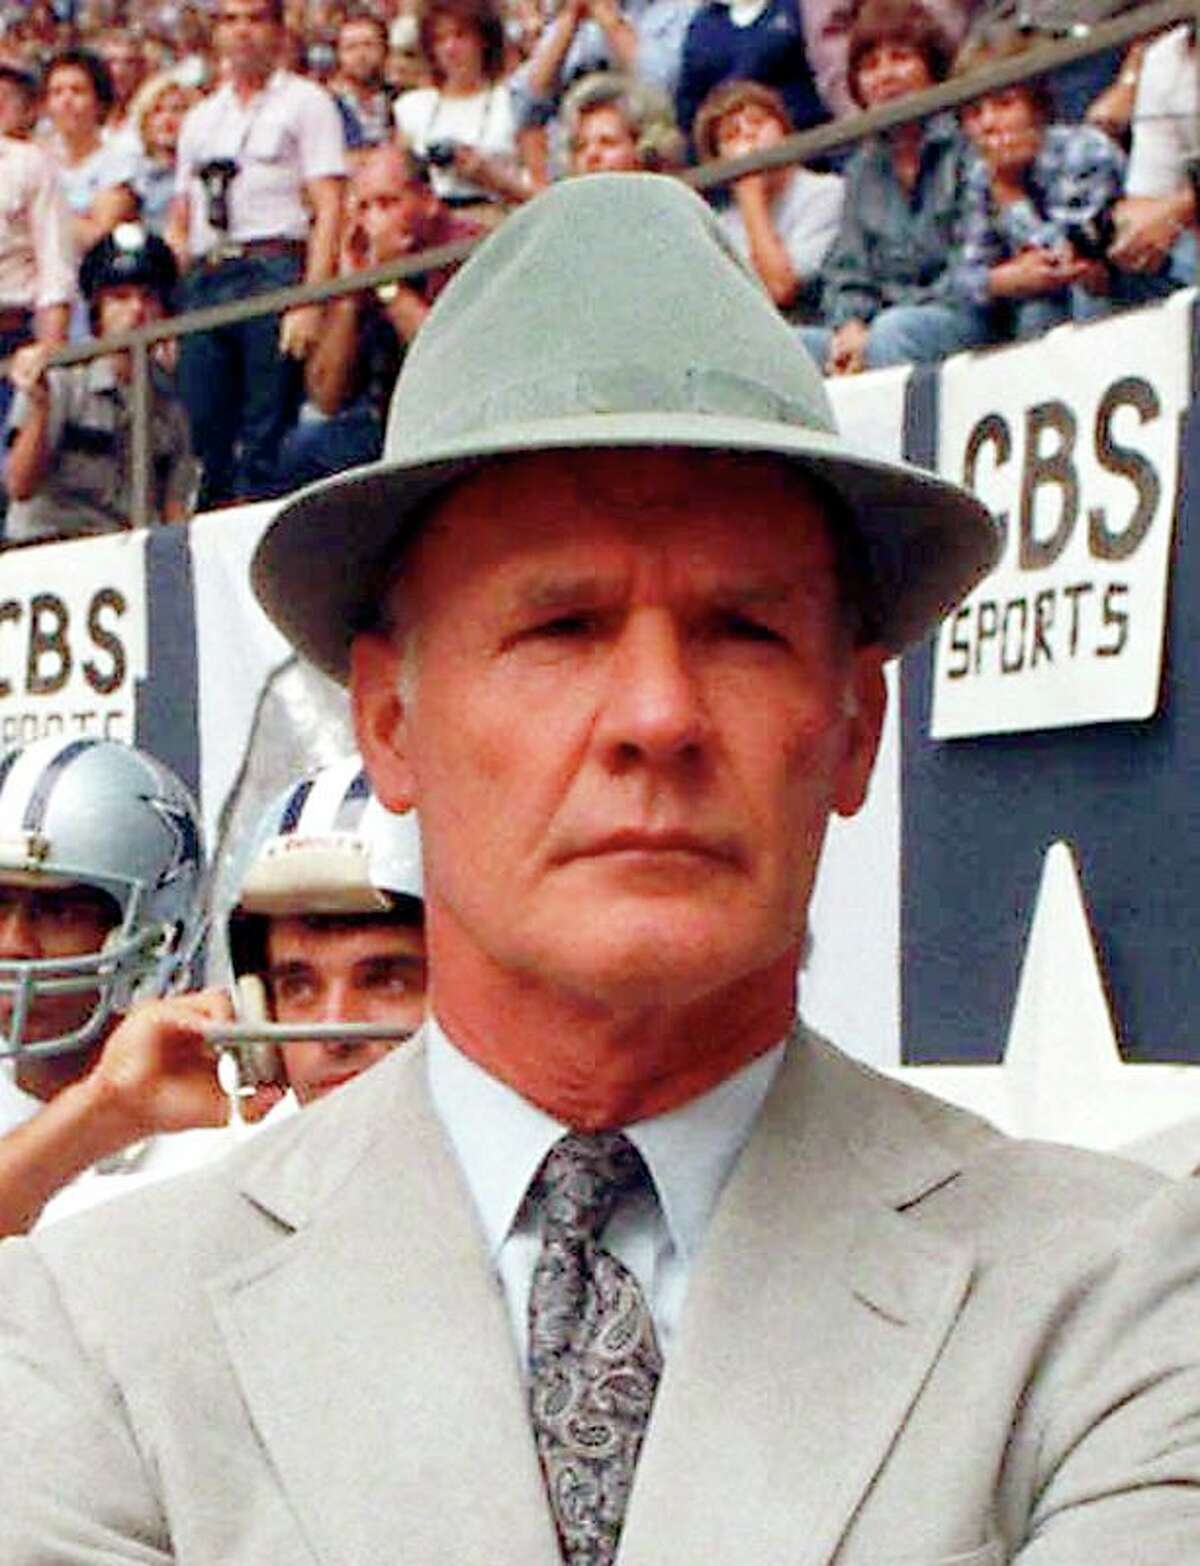 Hall of Fame, Dallas Cowboys coach Tom Landry solidifies title as